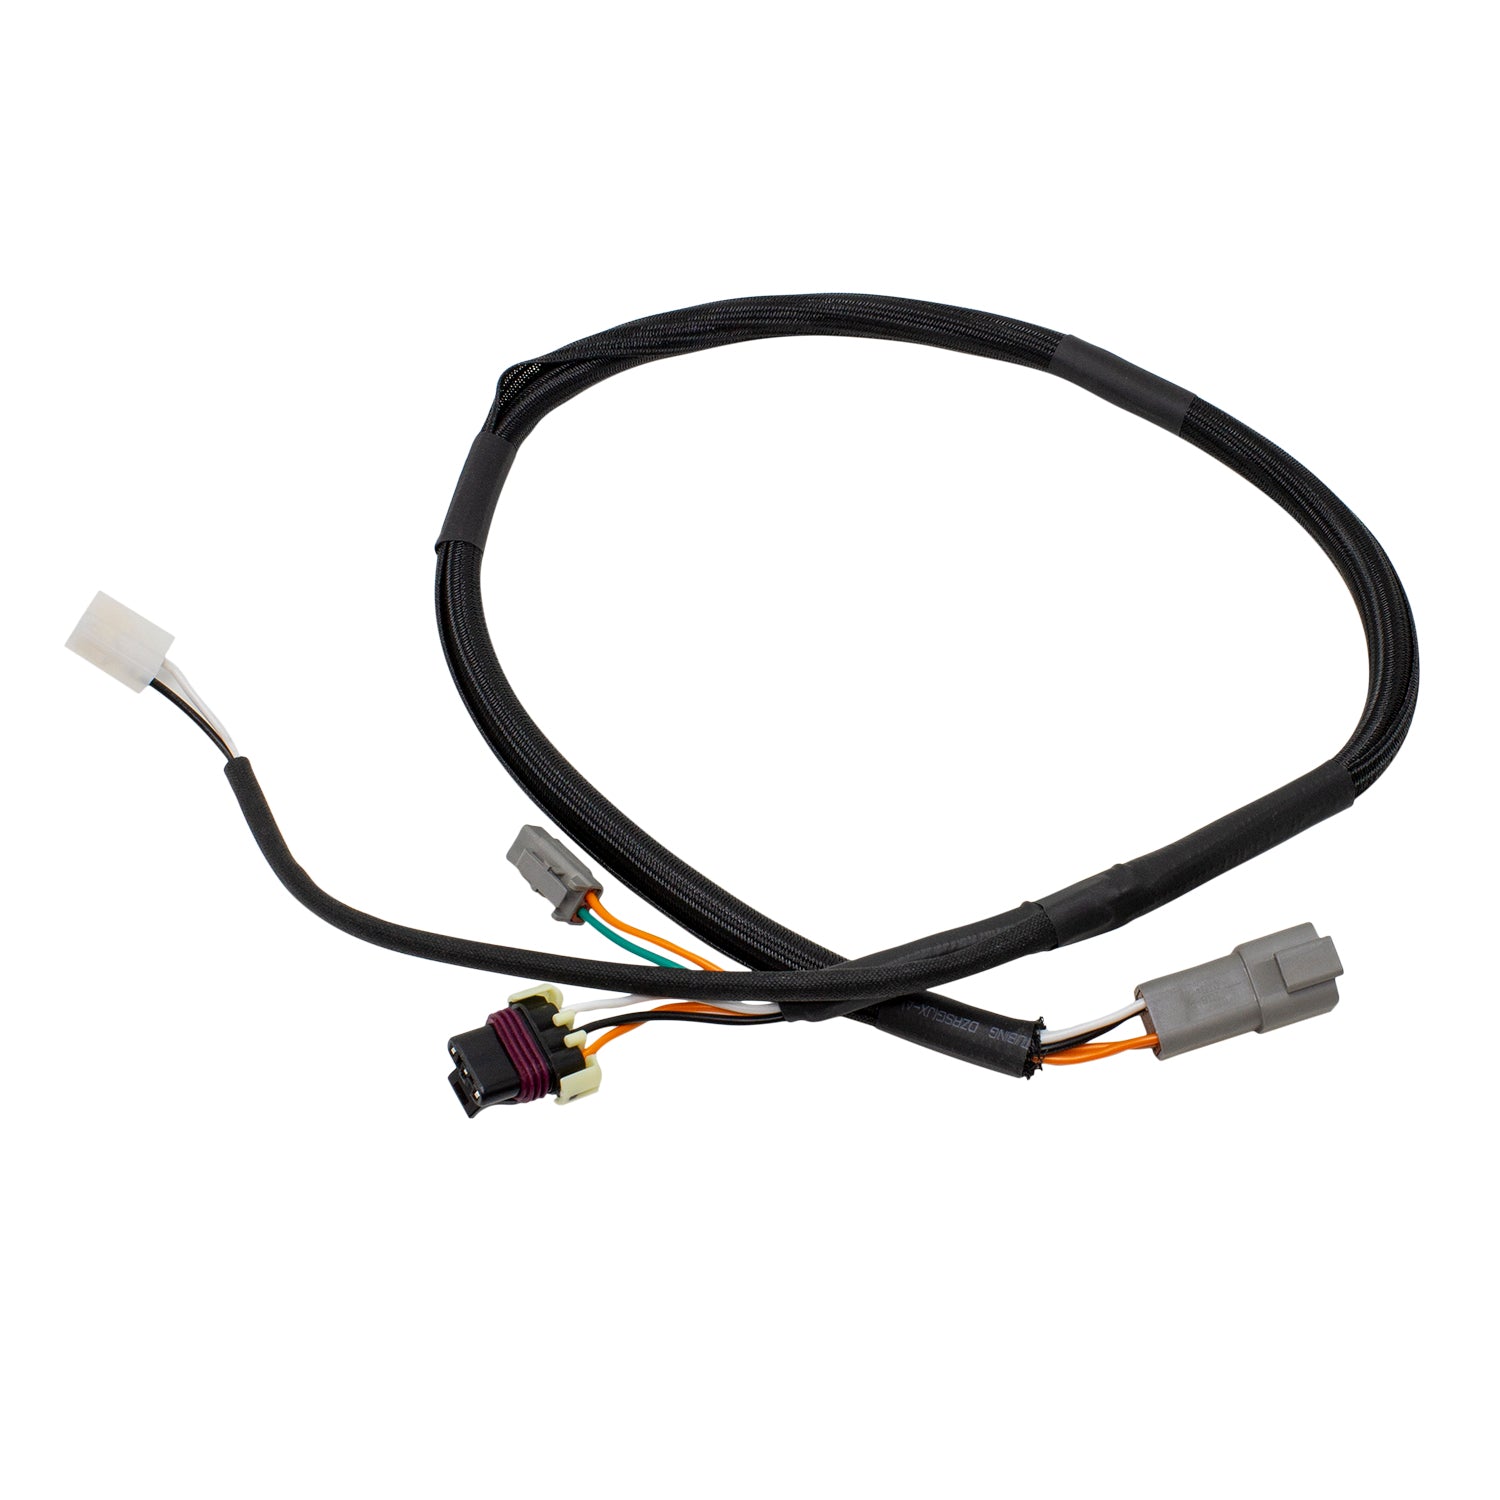 7117322, Wiper Wiring Harness For Bobcat at Duraforce